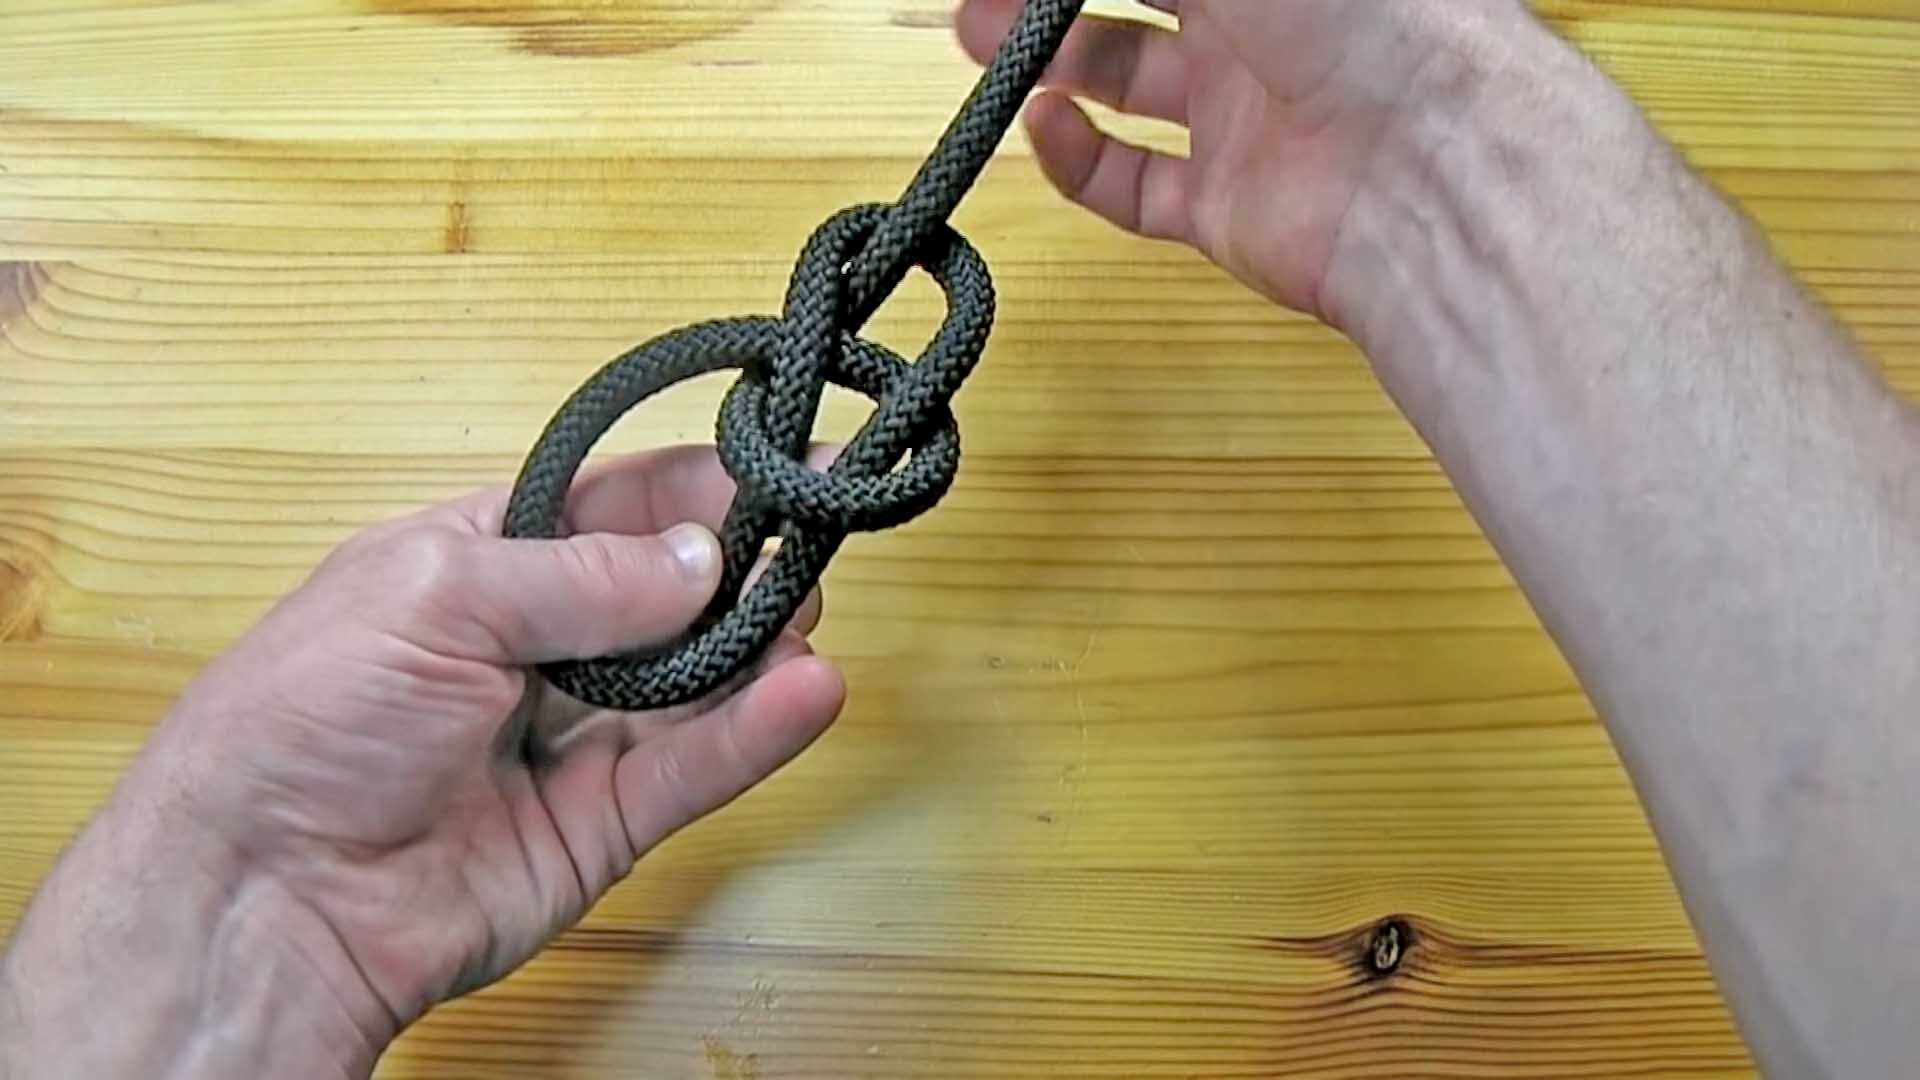 Tying a Bowline Knot using a black rope.